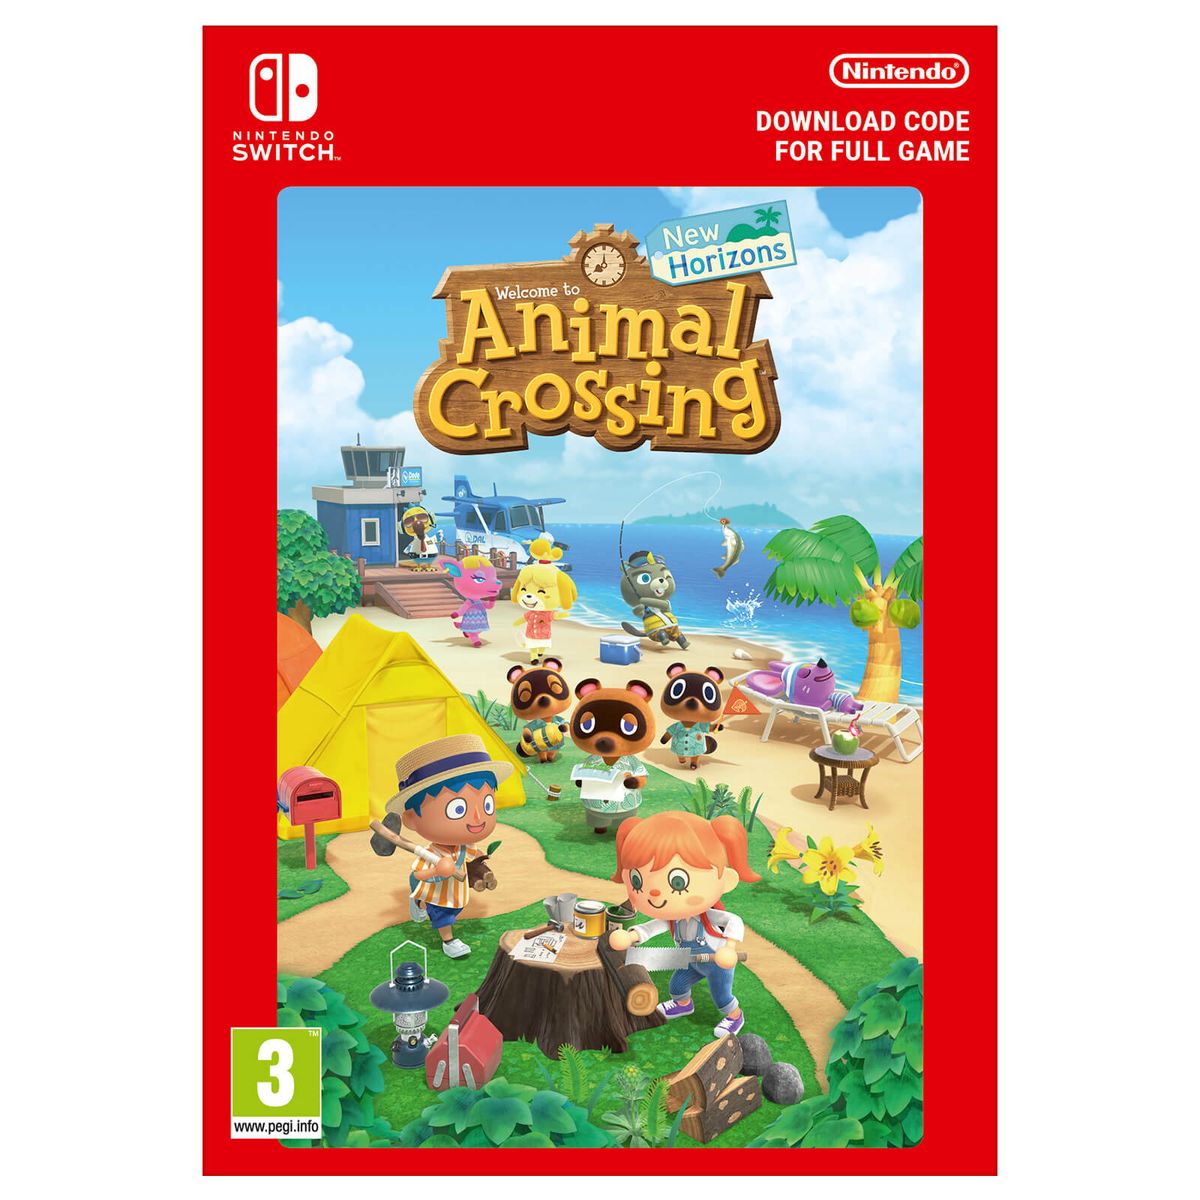 used animal crossing new horizons switch